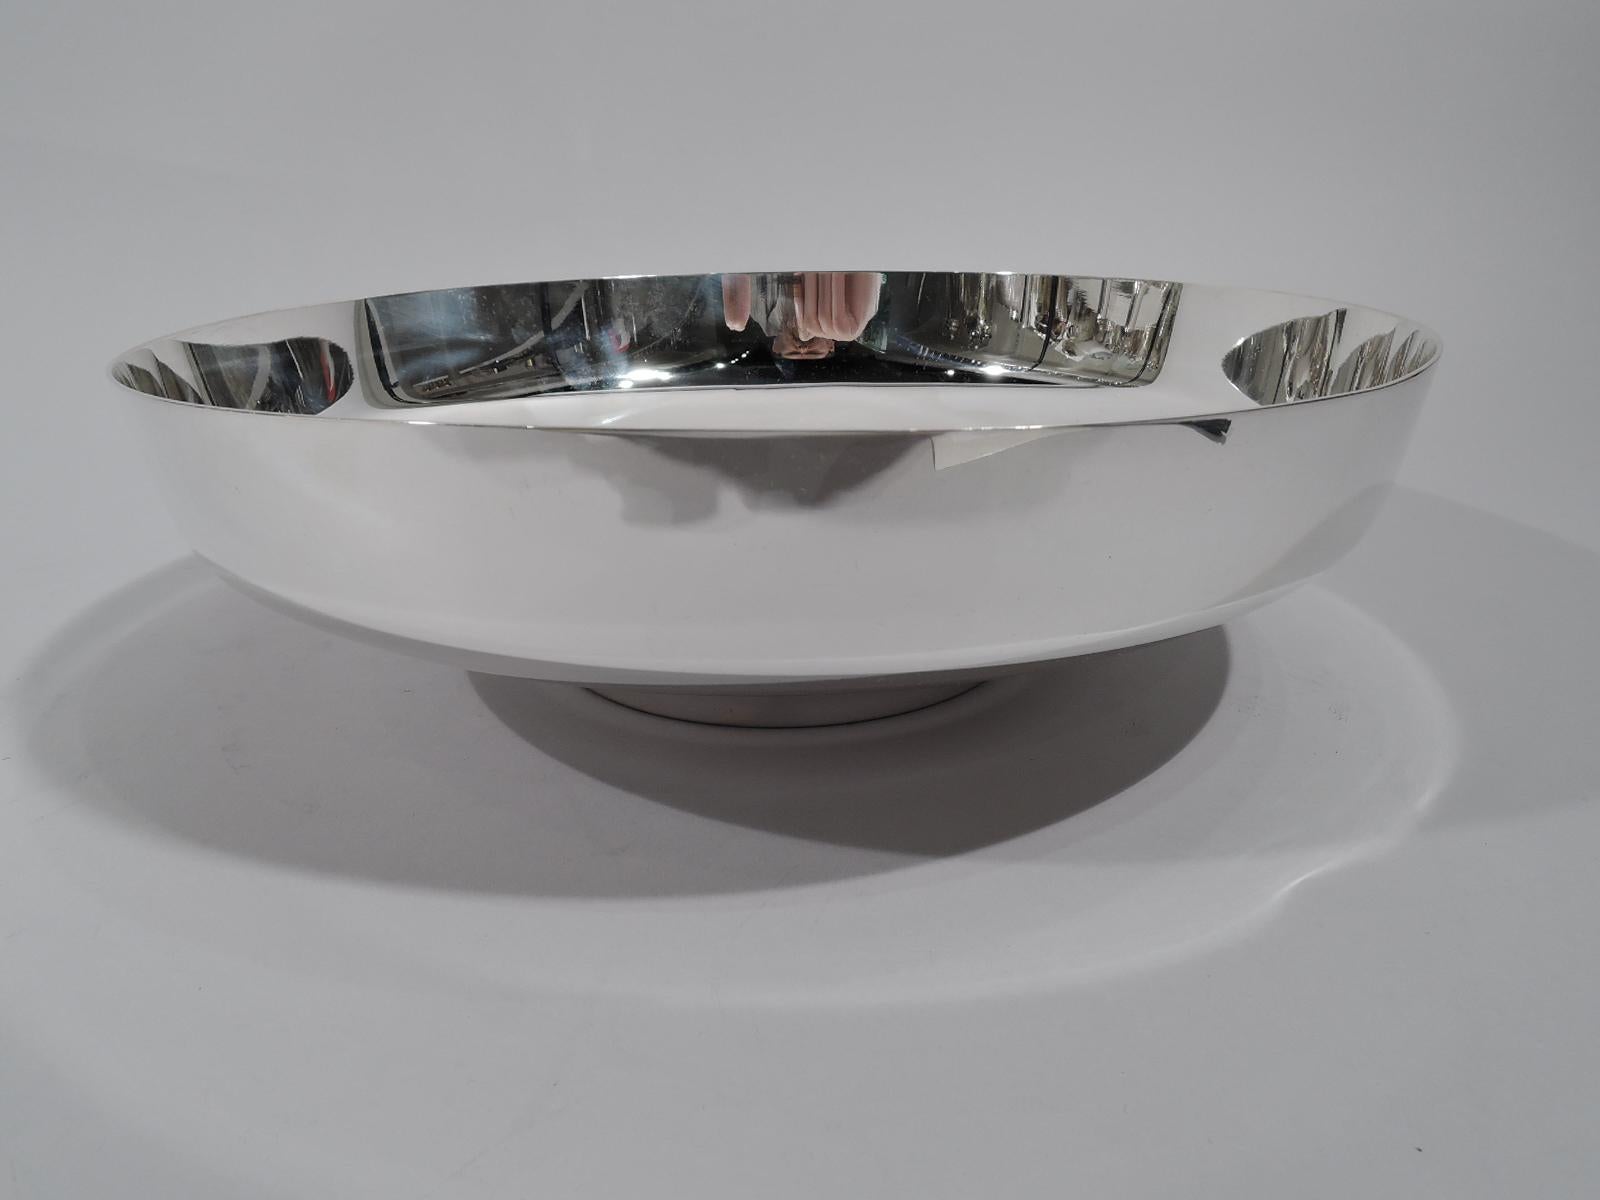 Mid-Century Modern sterling silver bowl. Made by Georg Jensen in Copenhagen. Curved well and short straight sides. Short and tapering inset foot. Spare Henning Koppel form. Postwar hallmark including no. 1132A and designer’s stamp. Weight: 35 troy